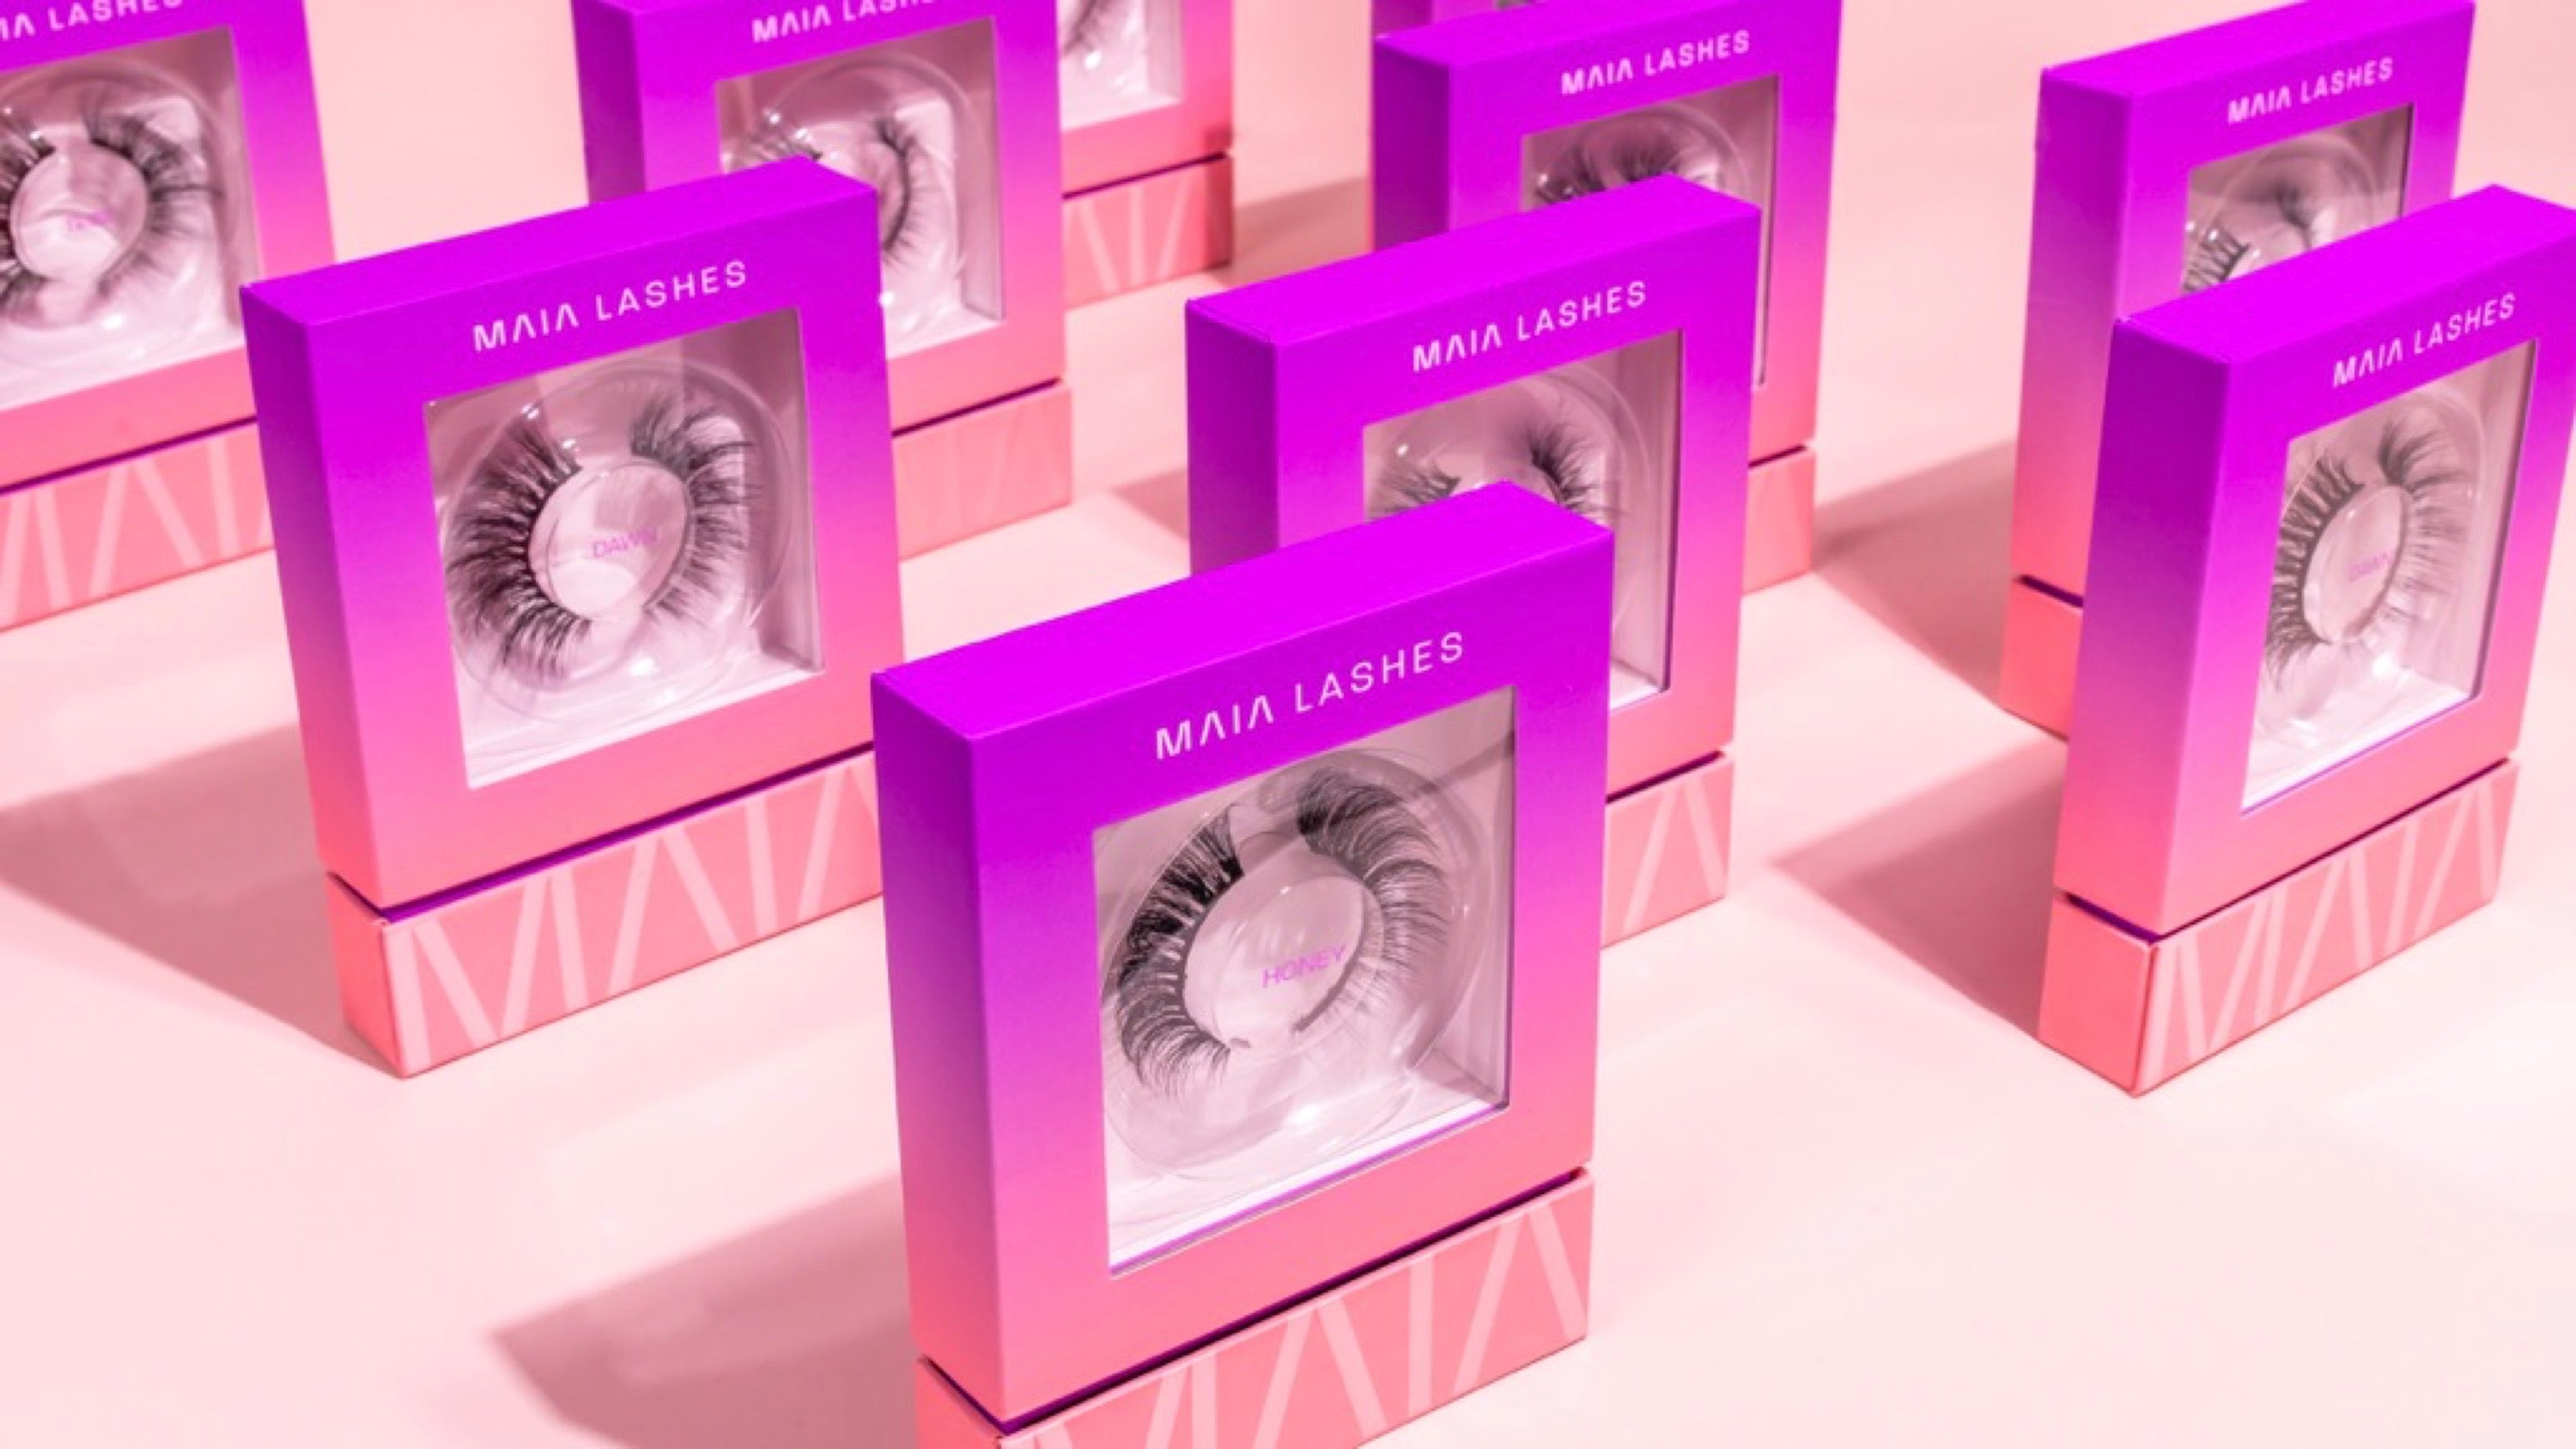 How to apply your Maia Lashes video